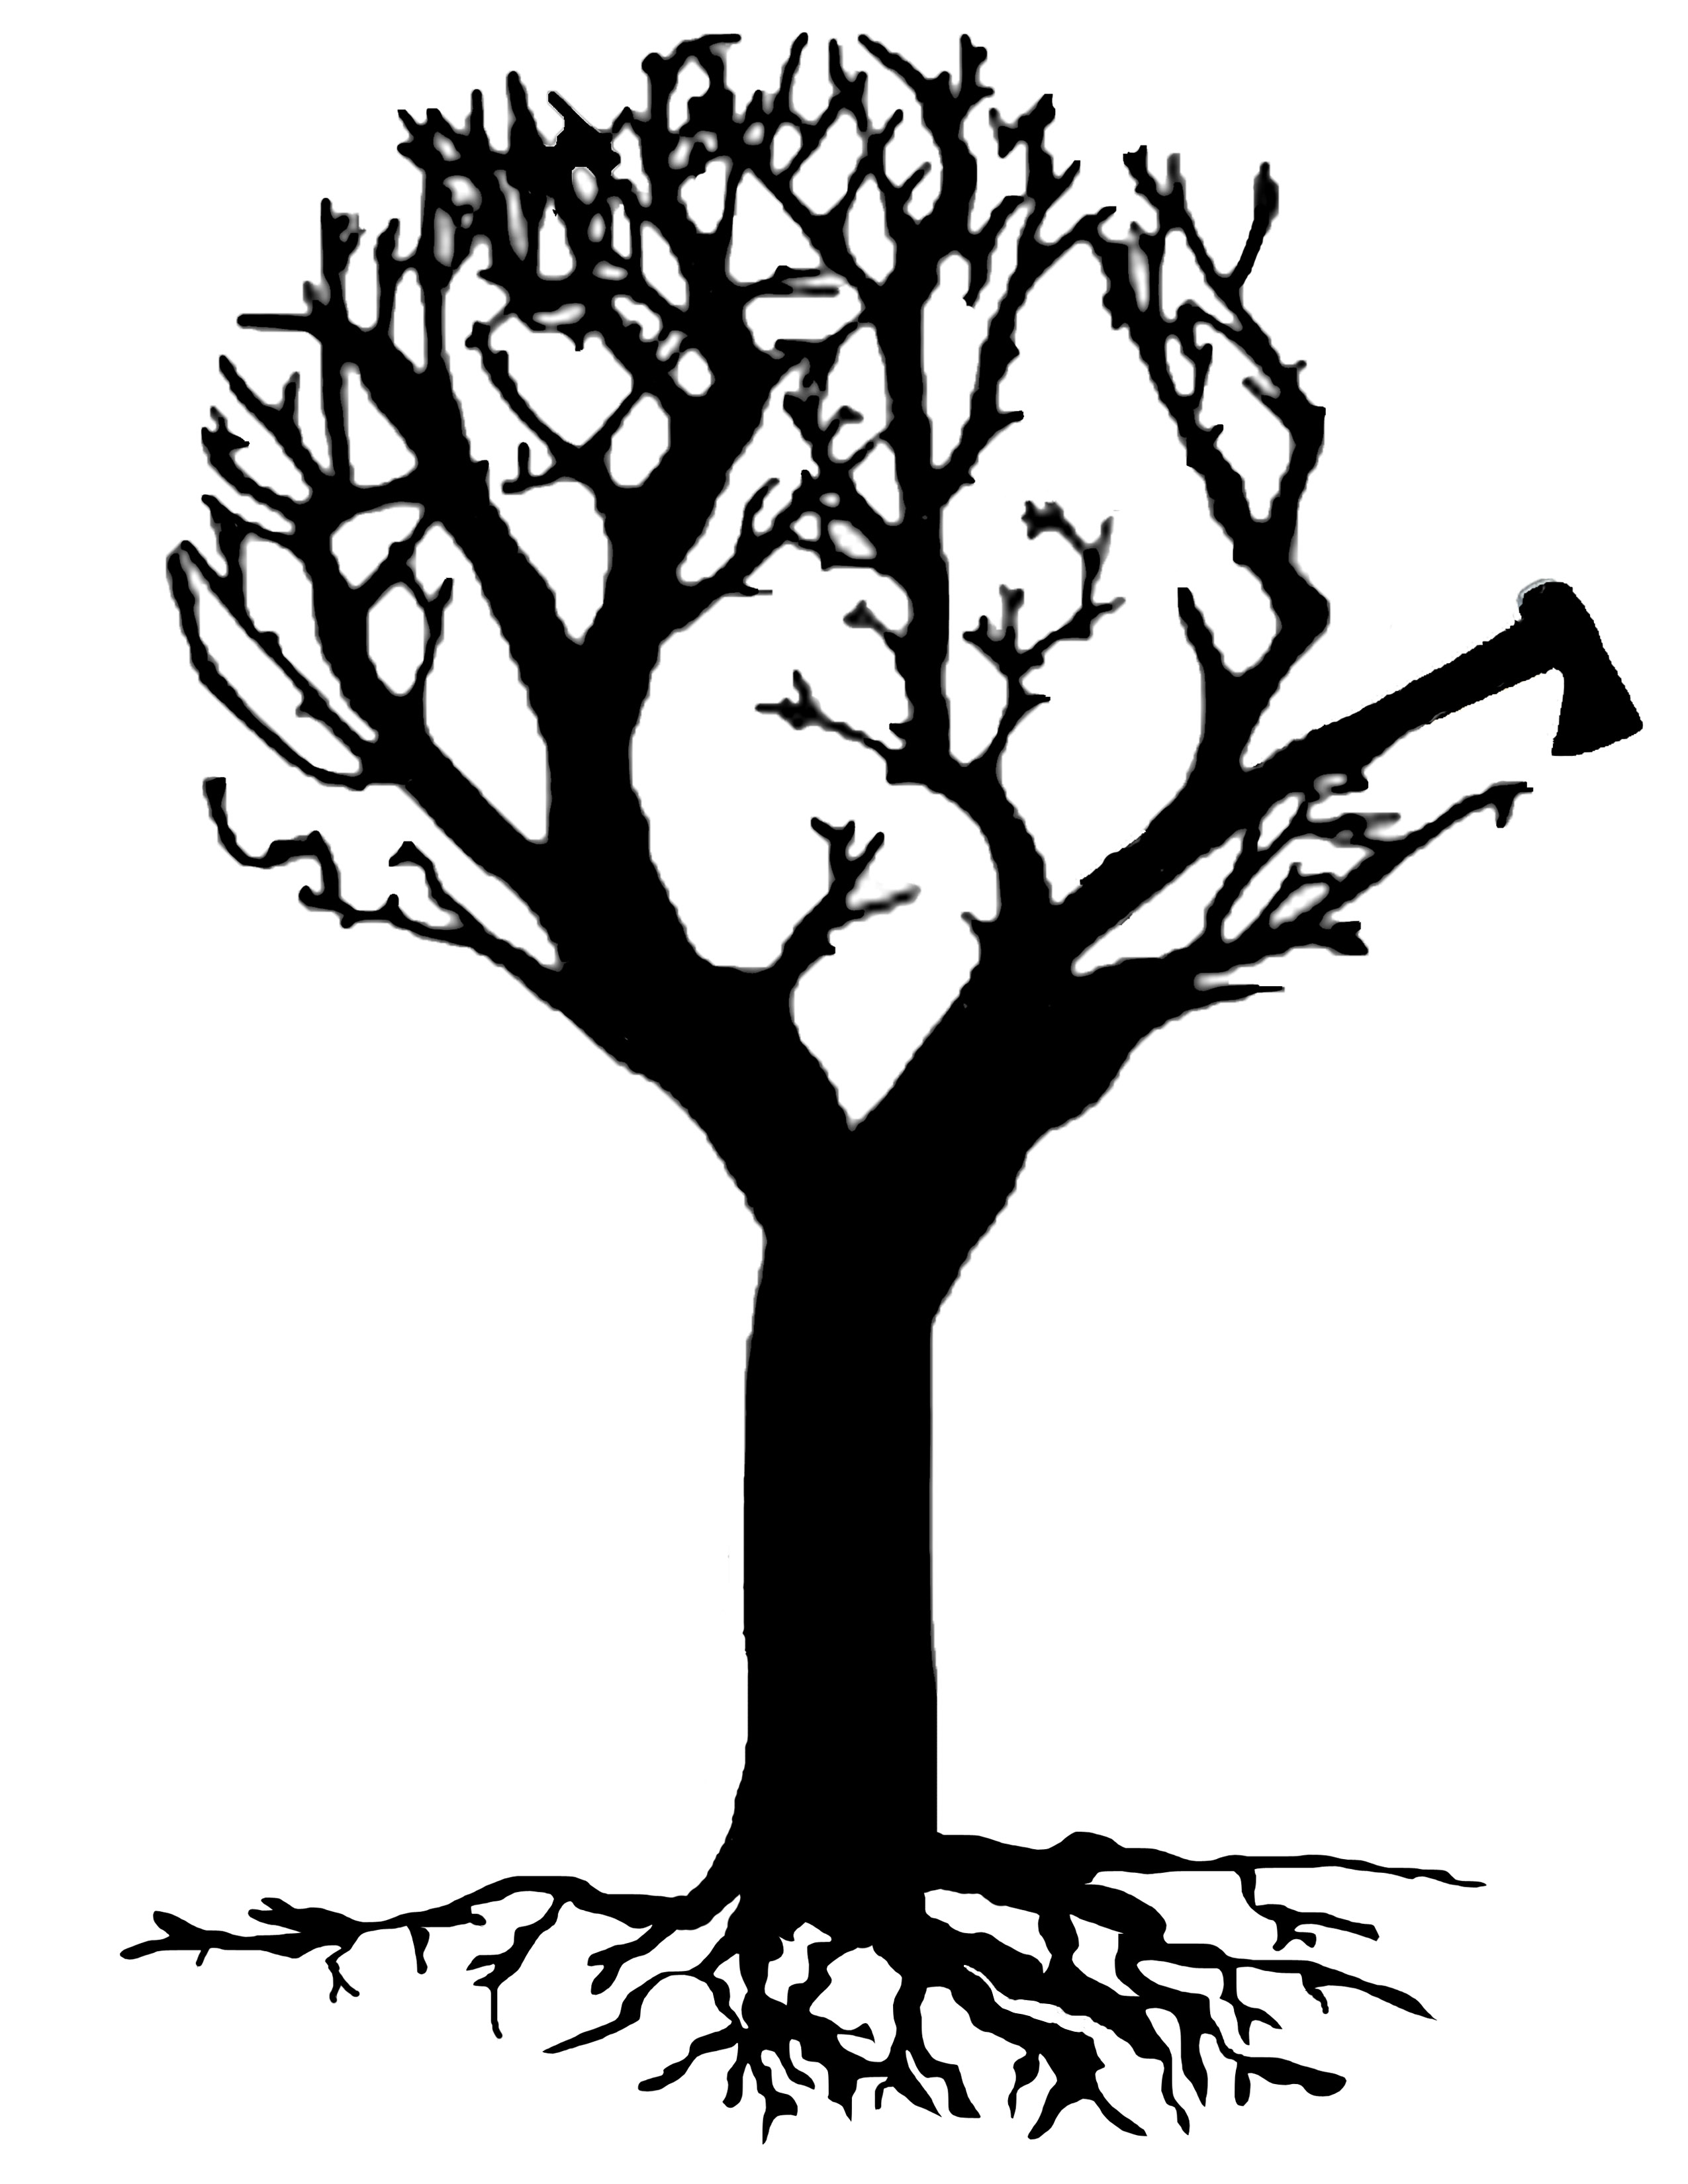 Acacia Tree Silhouette Clipart - ClipArt Best